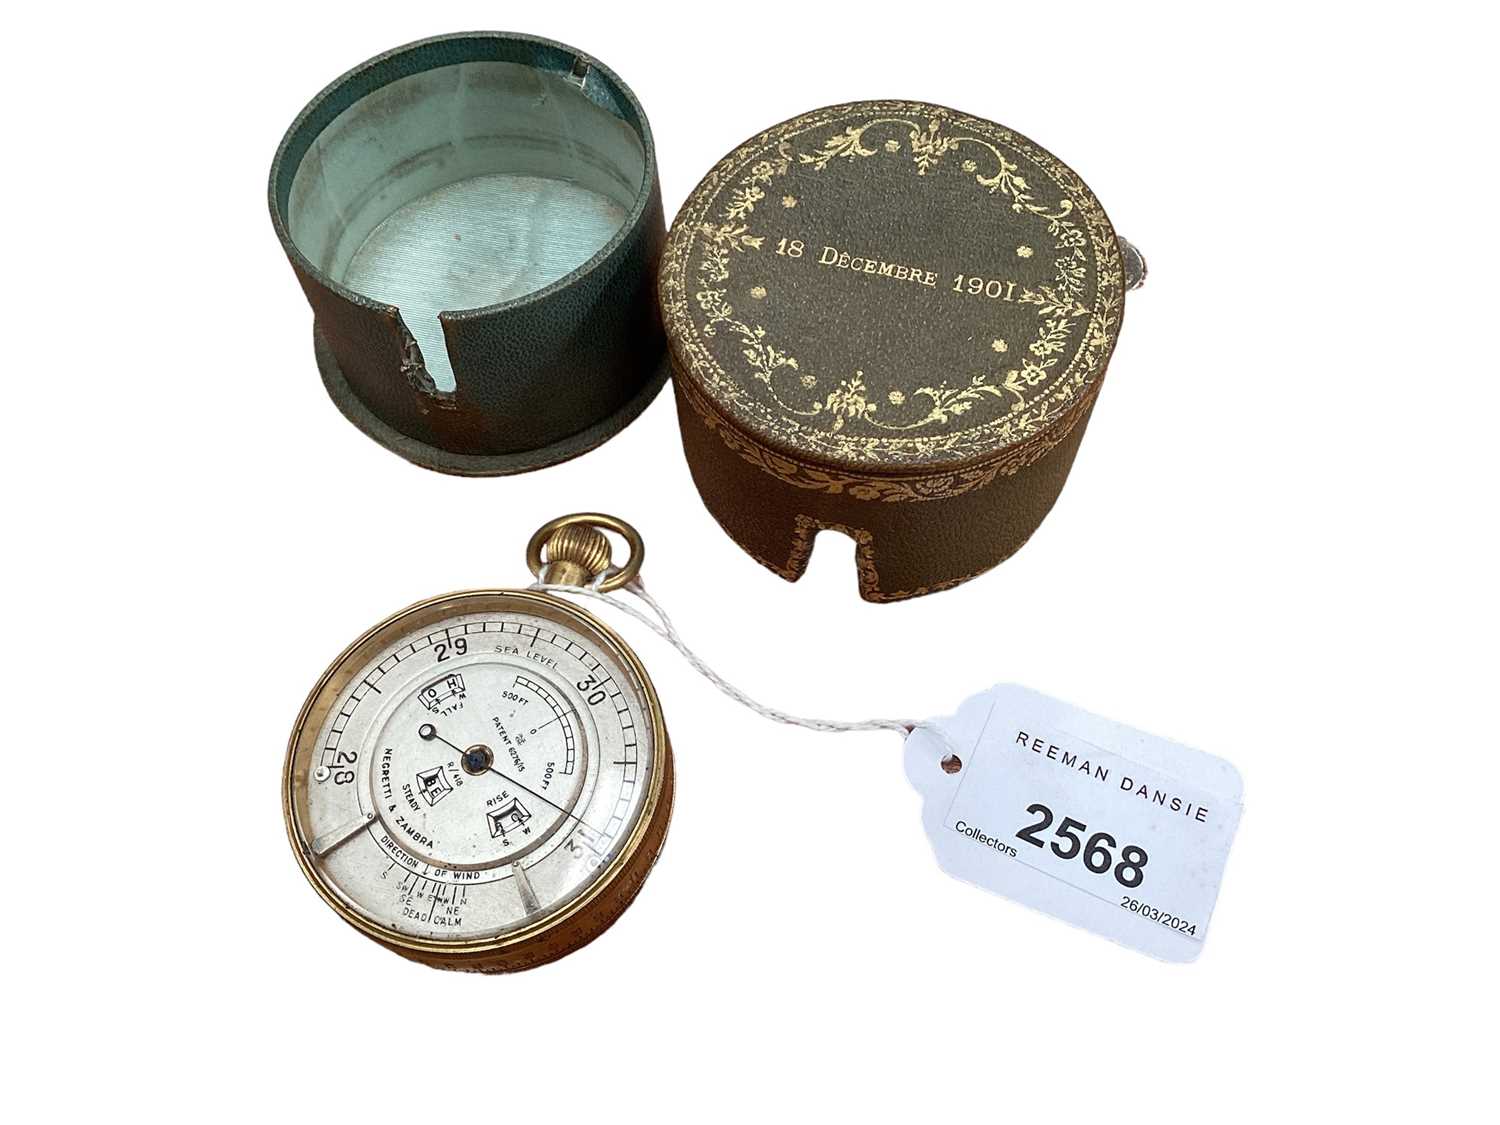 Lot 2568 - Early 20th century Negretti & Zambra Gilt Brass Weather Watch English, engraved to the silvered face 'Negretti & Zambra',  rear of case with letter codes for forecasts